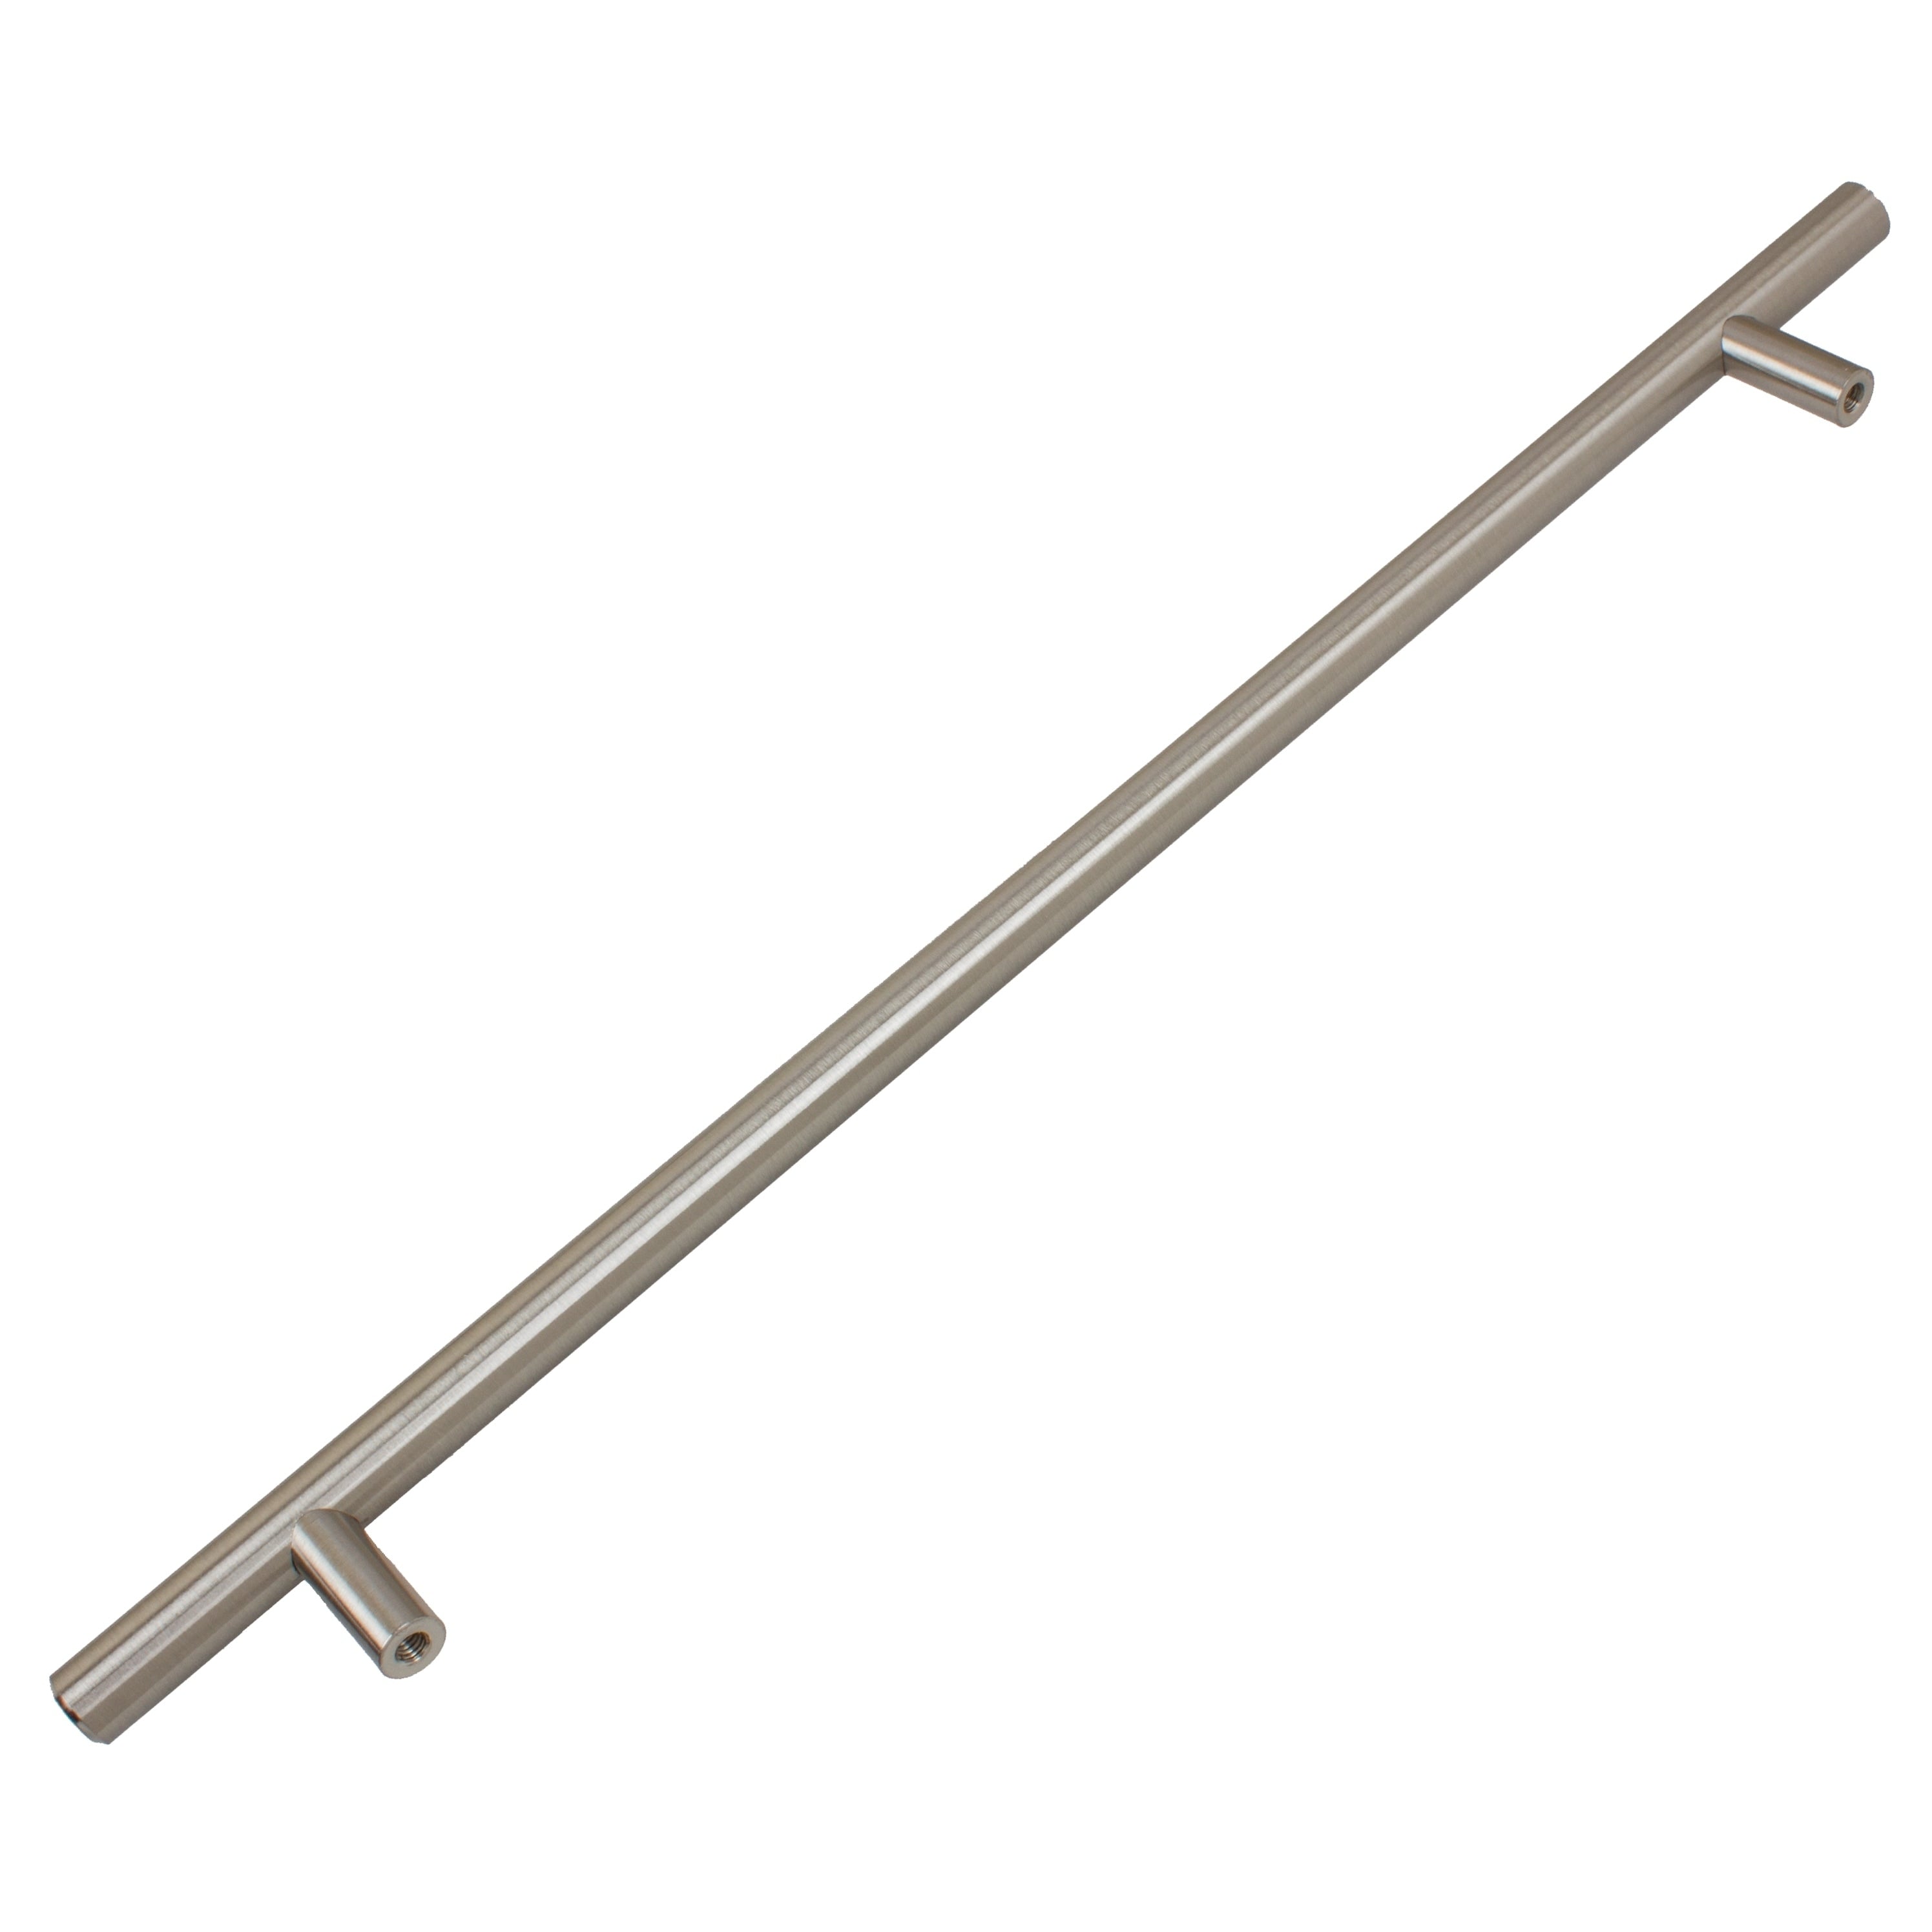 16-inch Solid Stainless Steel Finish 13 inch CC Cabinet Bar Pulls (Pack of 10) Grey Metal Nickel - Diamond Home USA